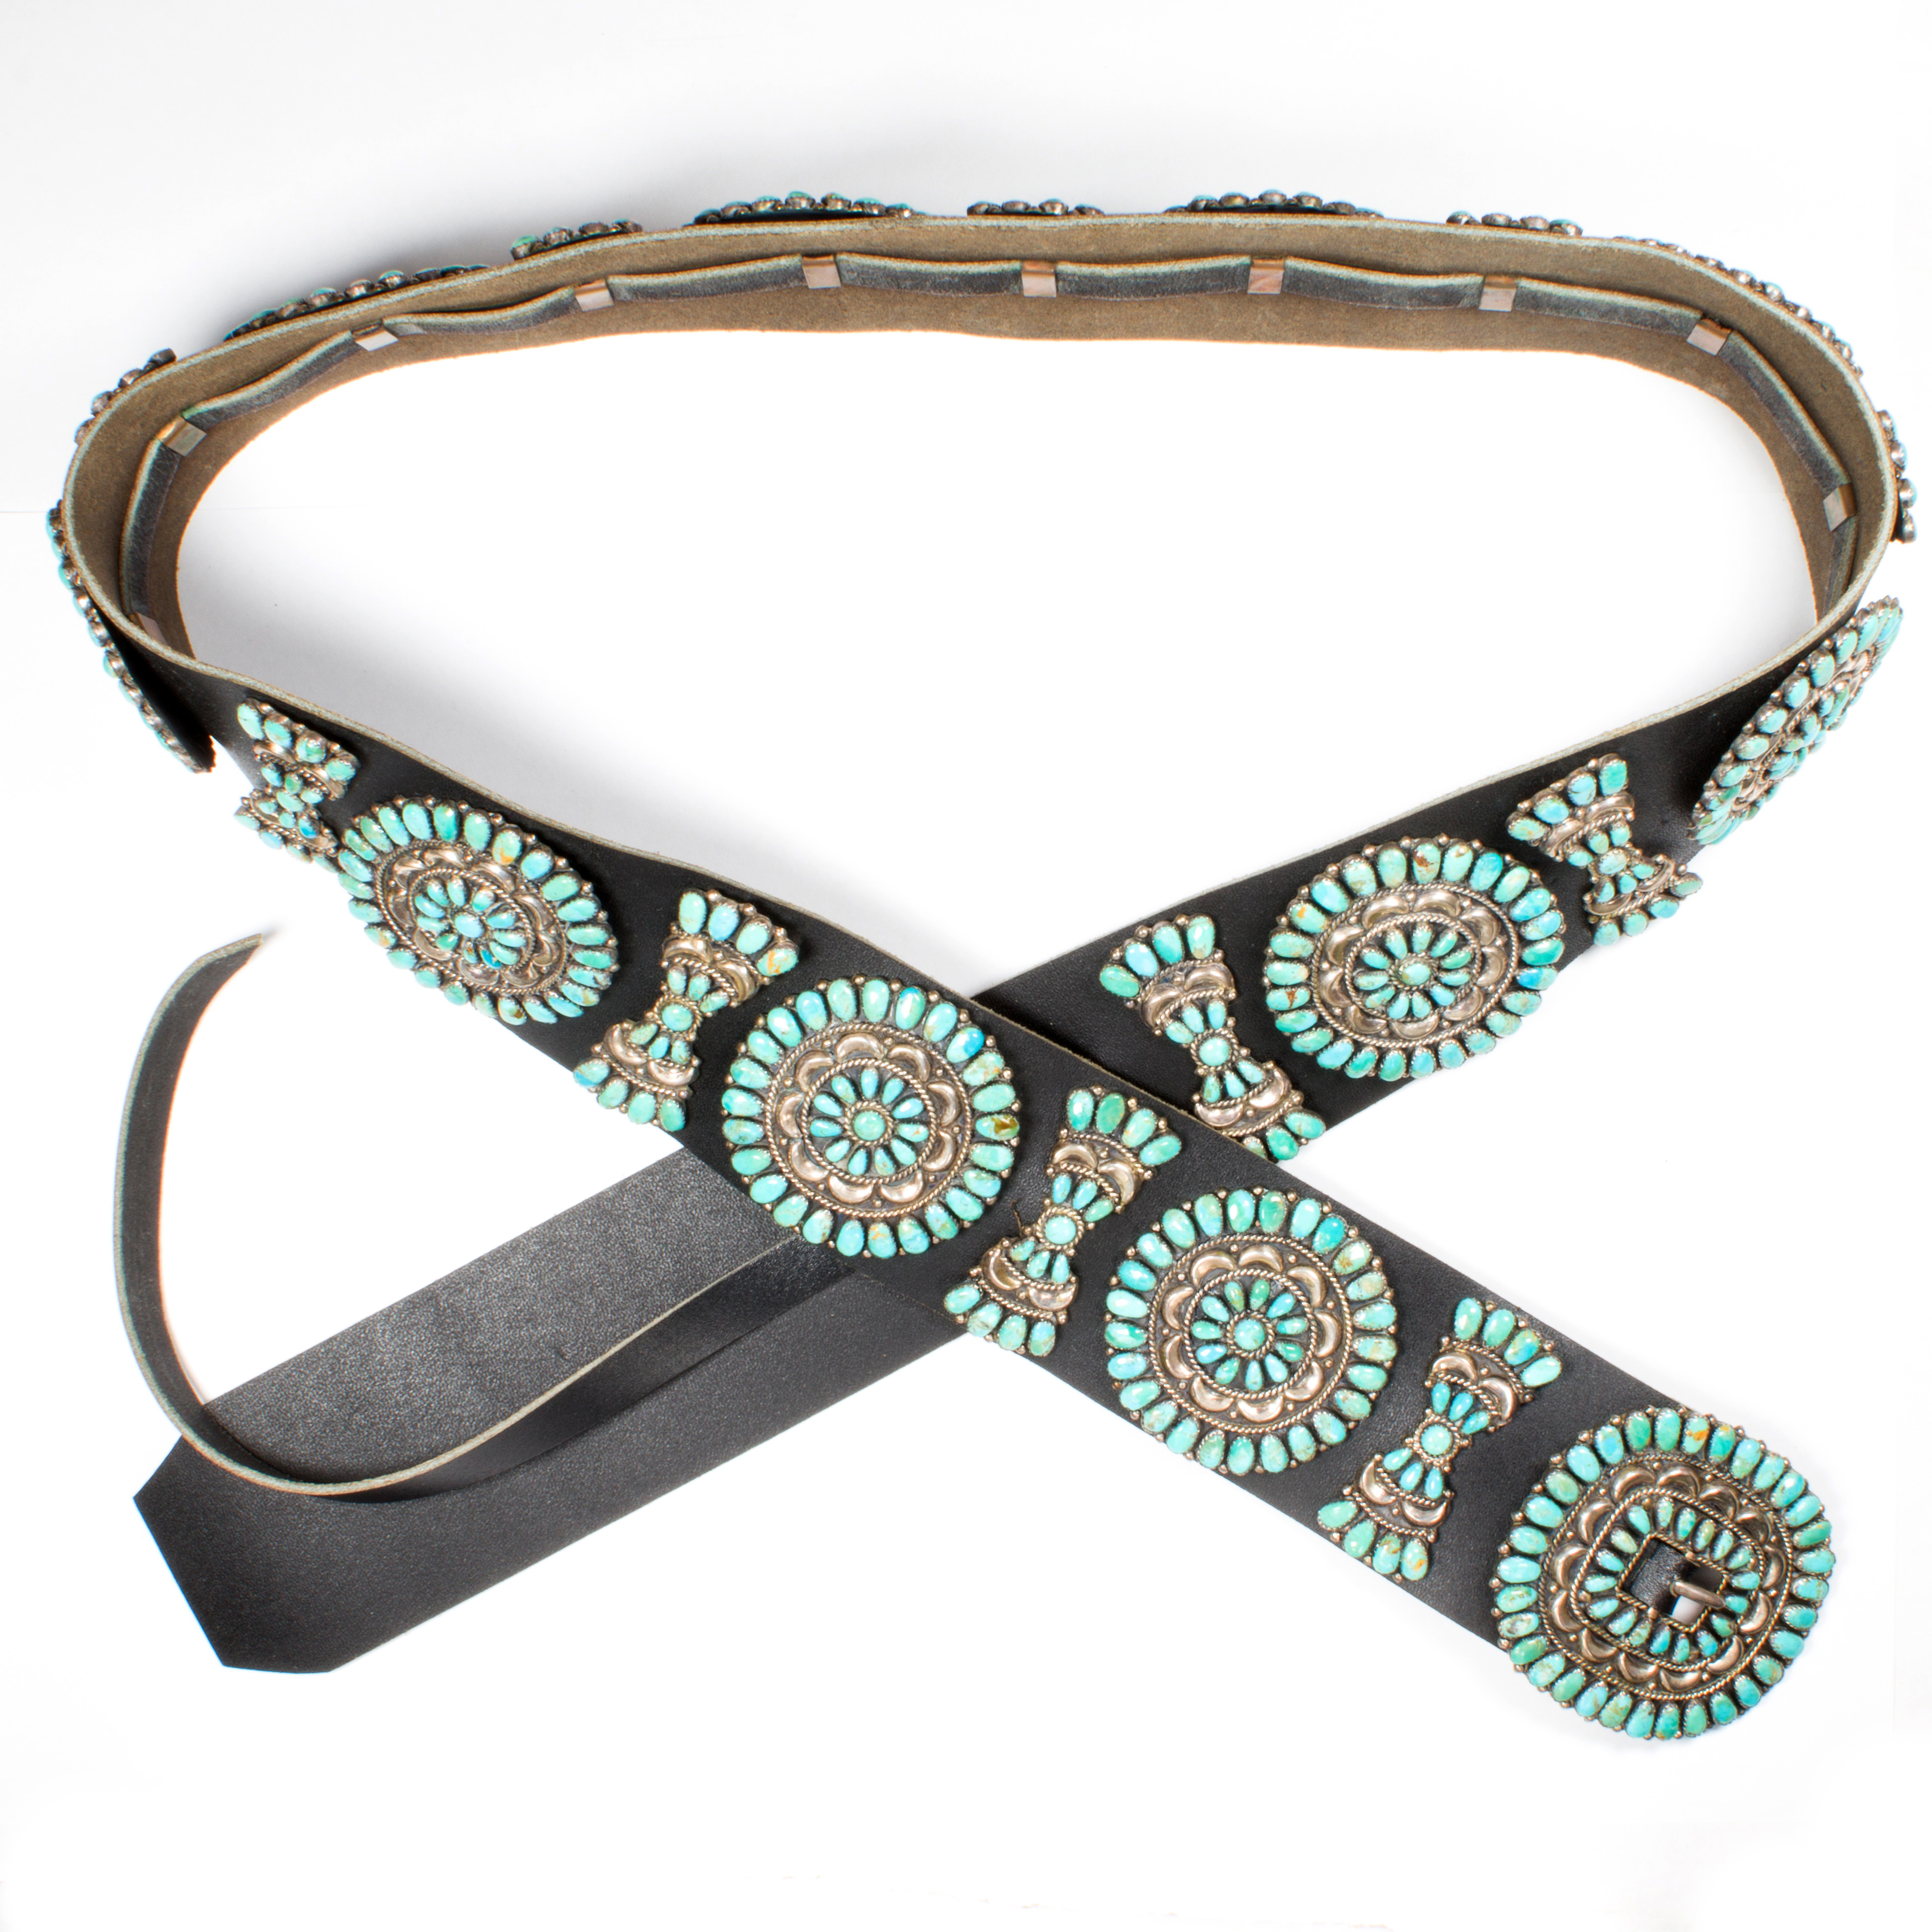 A TURQUOISE, SILVER AND LEATHER BELT